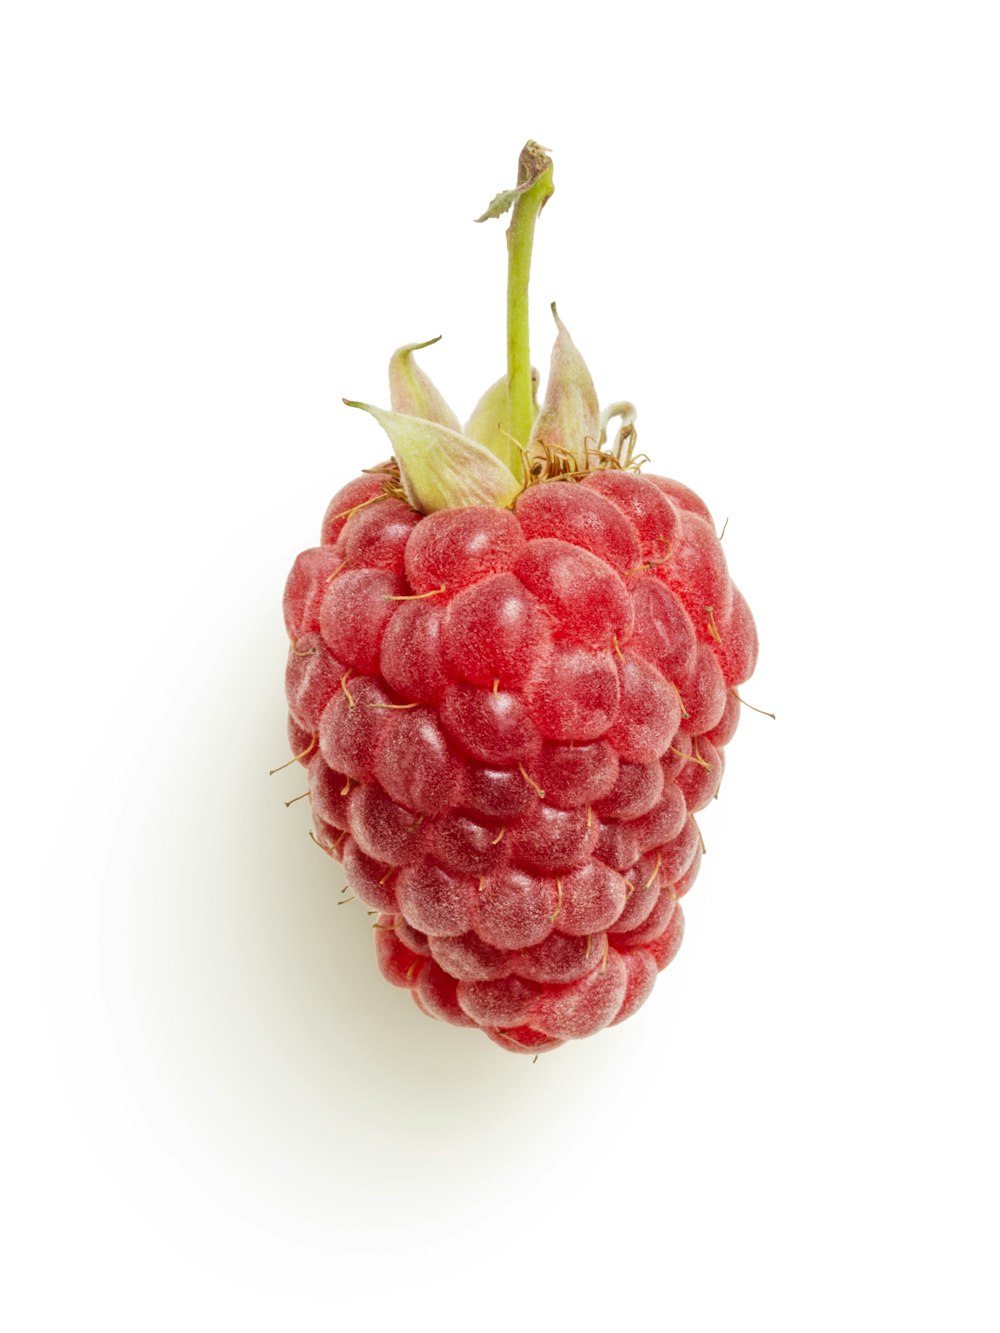 red raspberry on white background